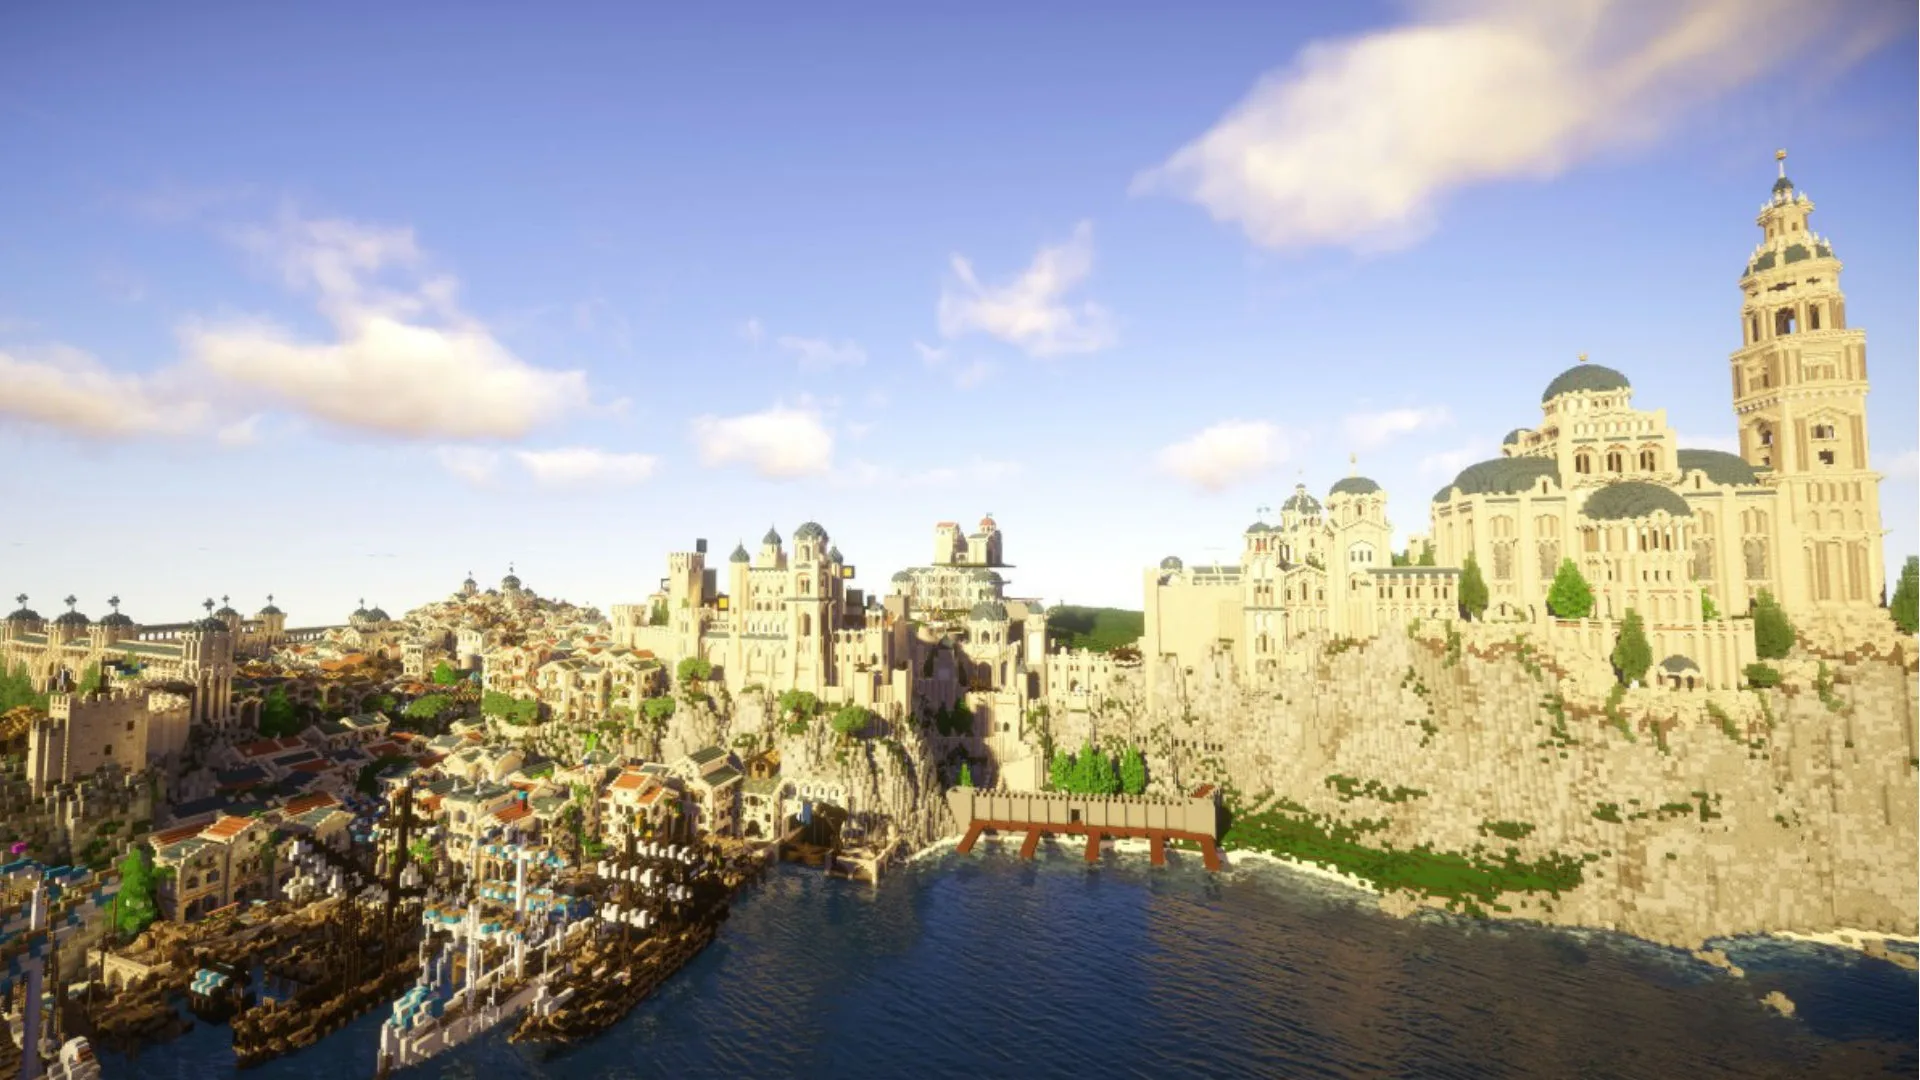 An image of a Minecraft build of Middle-Earth